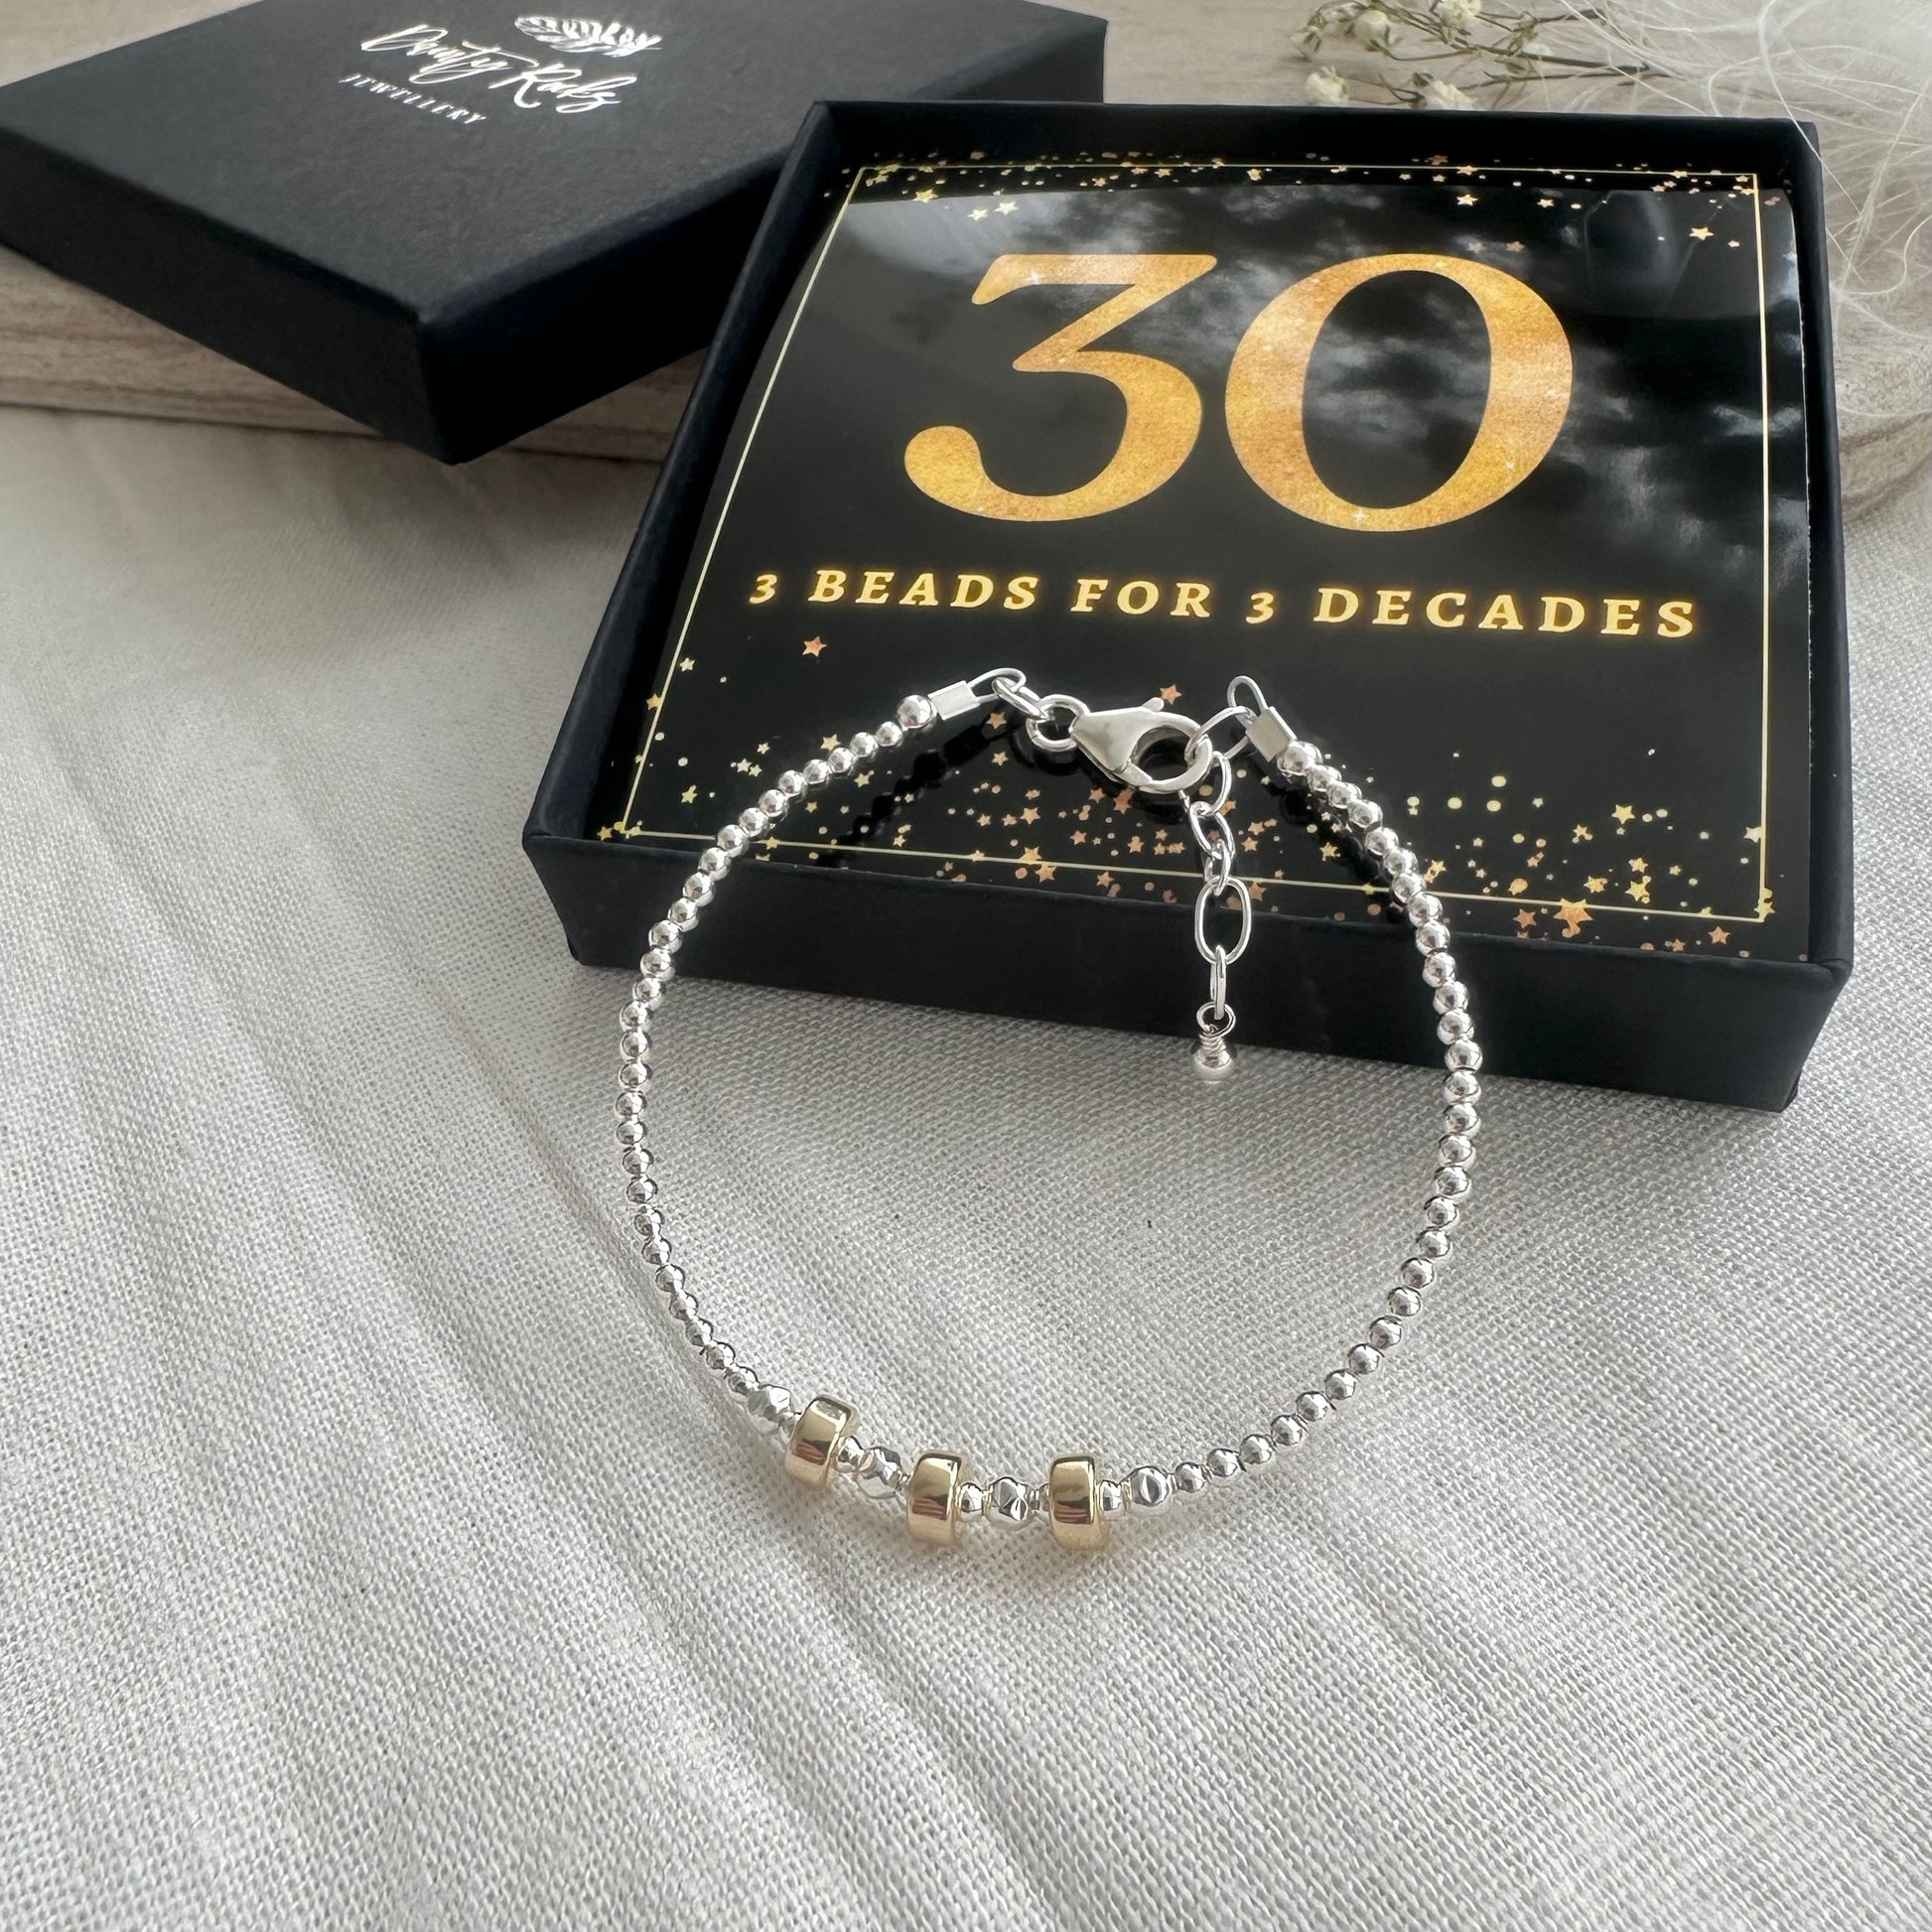 3 Decade Bracelet 30th Birthday Jewellery Gift for Her in Sterling Silver